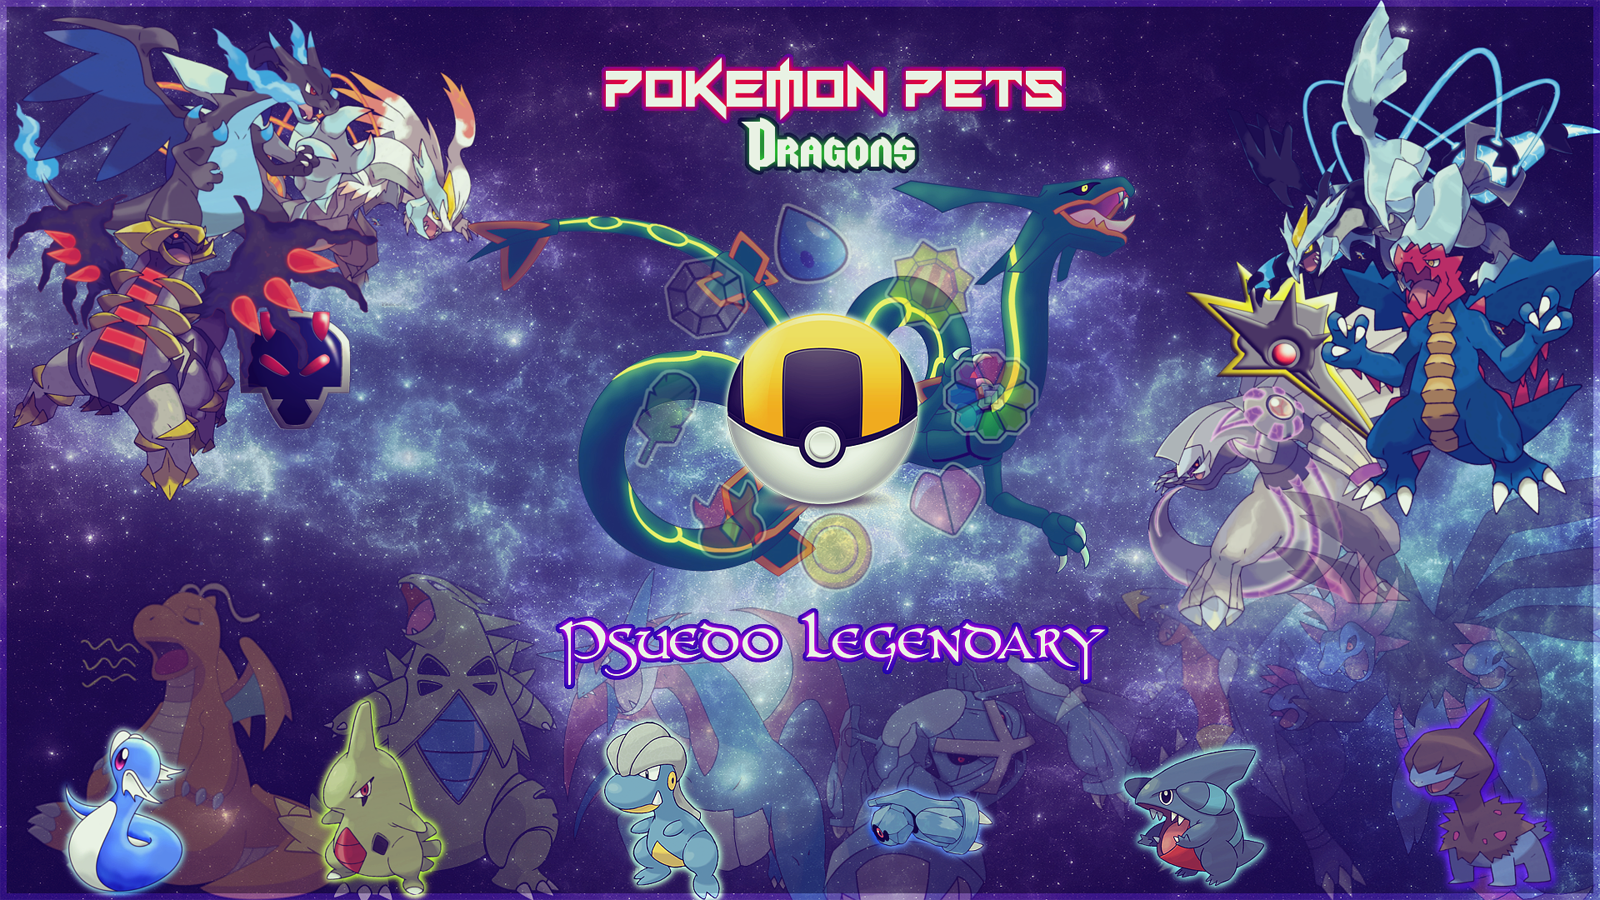 Pokemon Pets Official Game Wallpaper Quality Pixel, Free Online Pokémon MMO RPG Browser Game